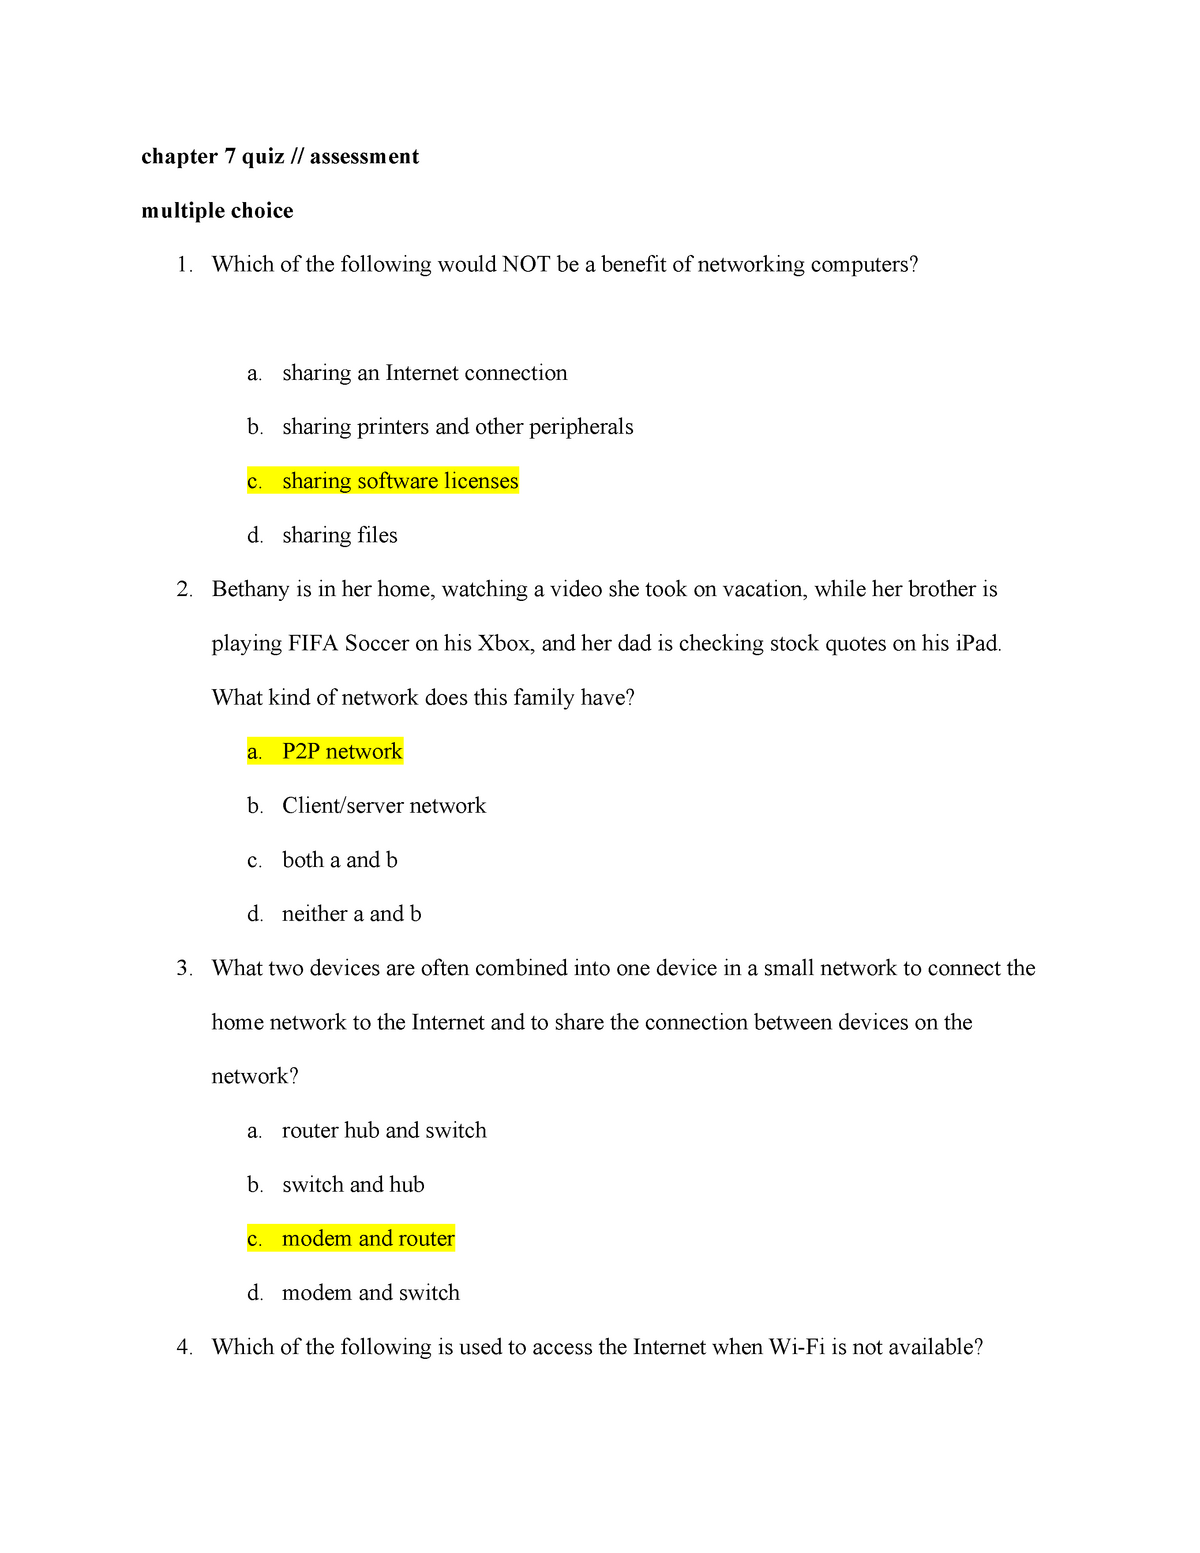 assignment chapter 7 quiz